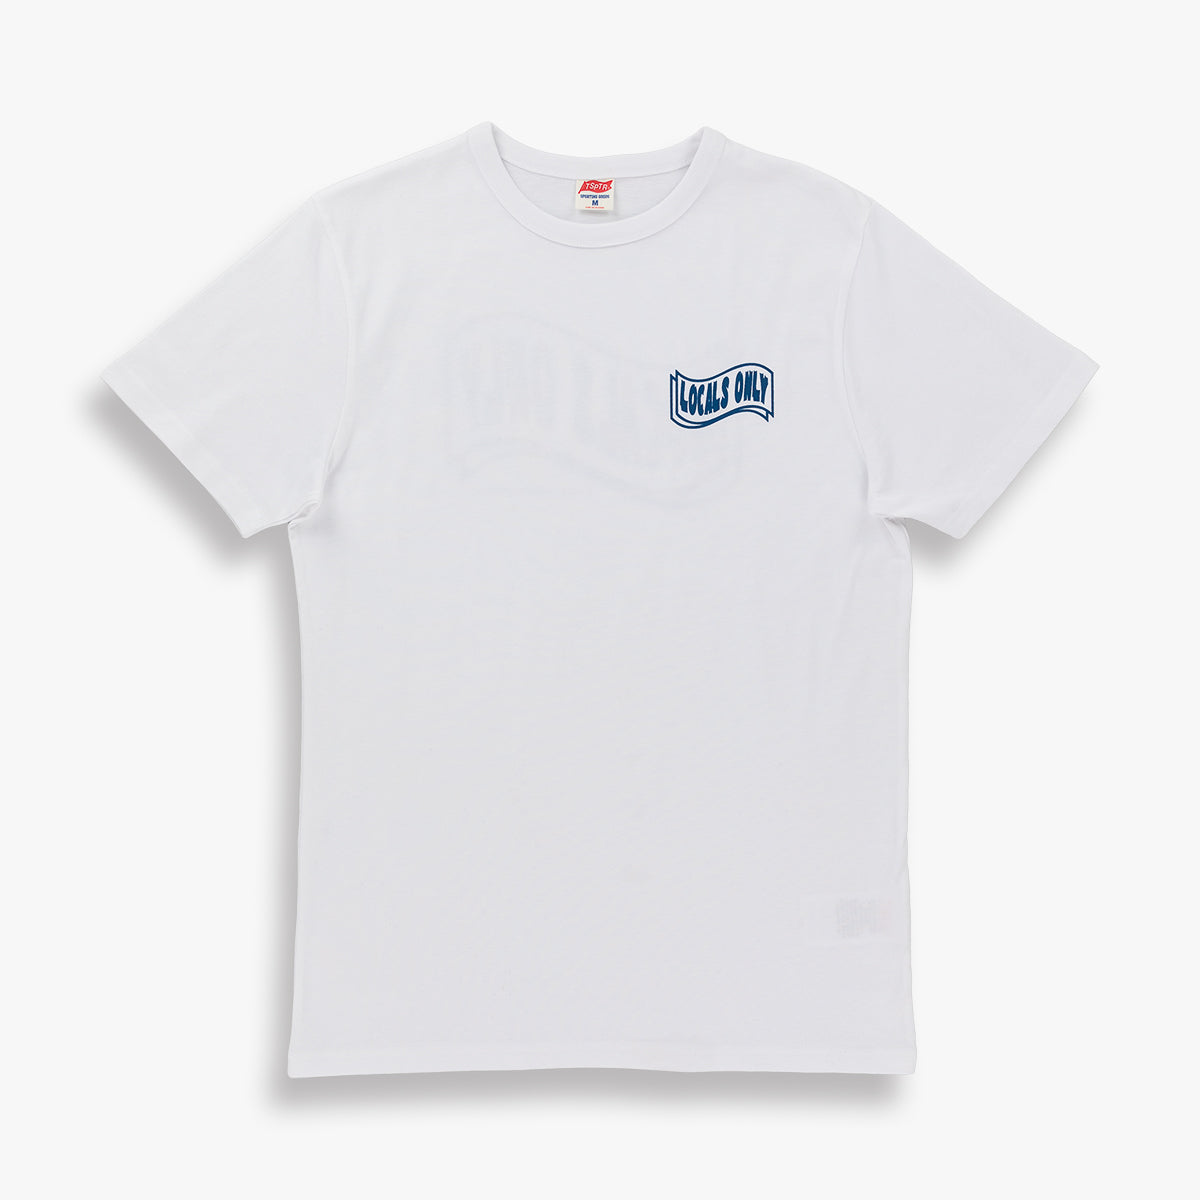 LOCALS ONLY TEE